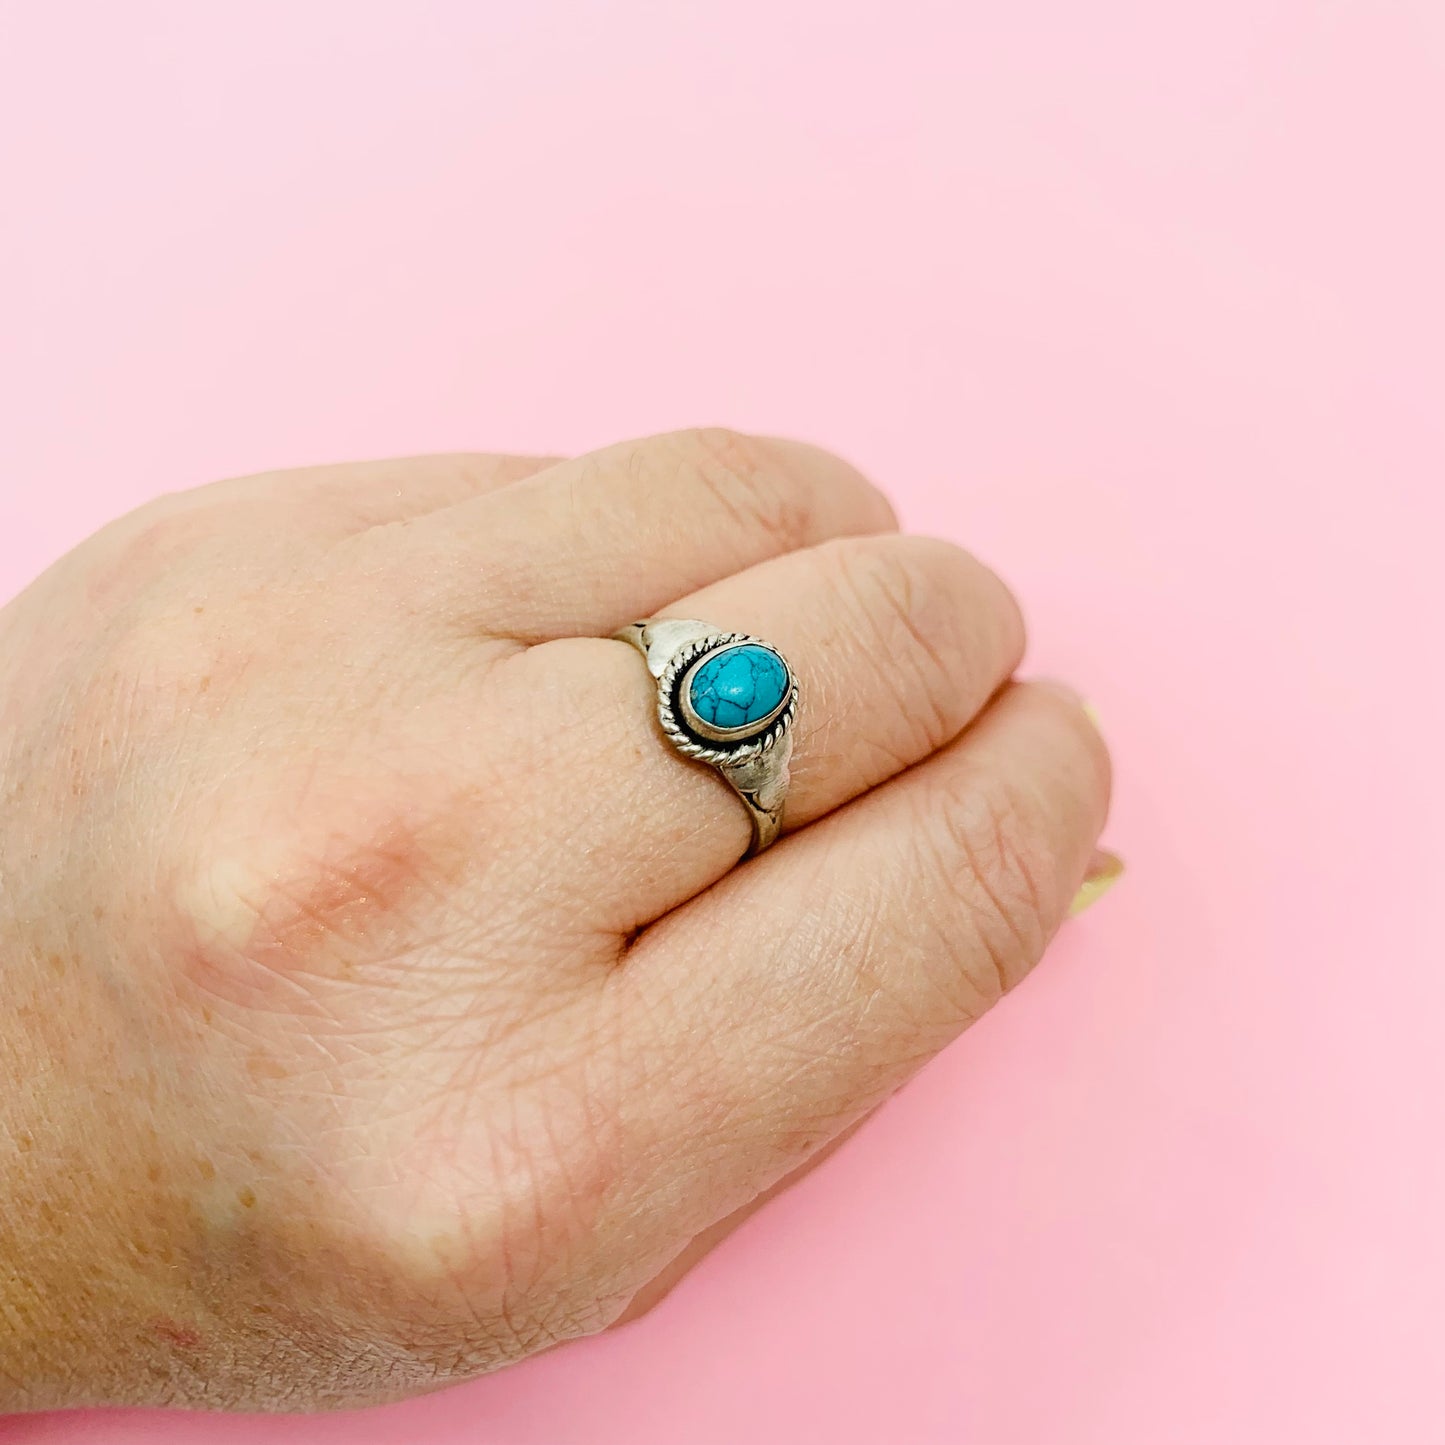 Midcentury silver ring with turquoise center stone